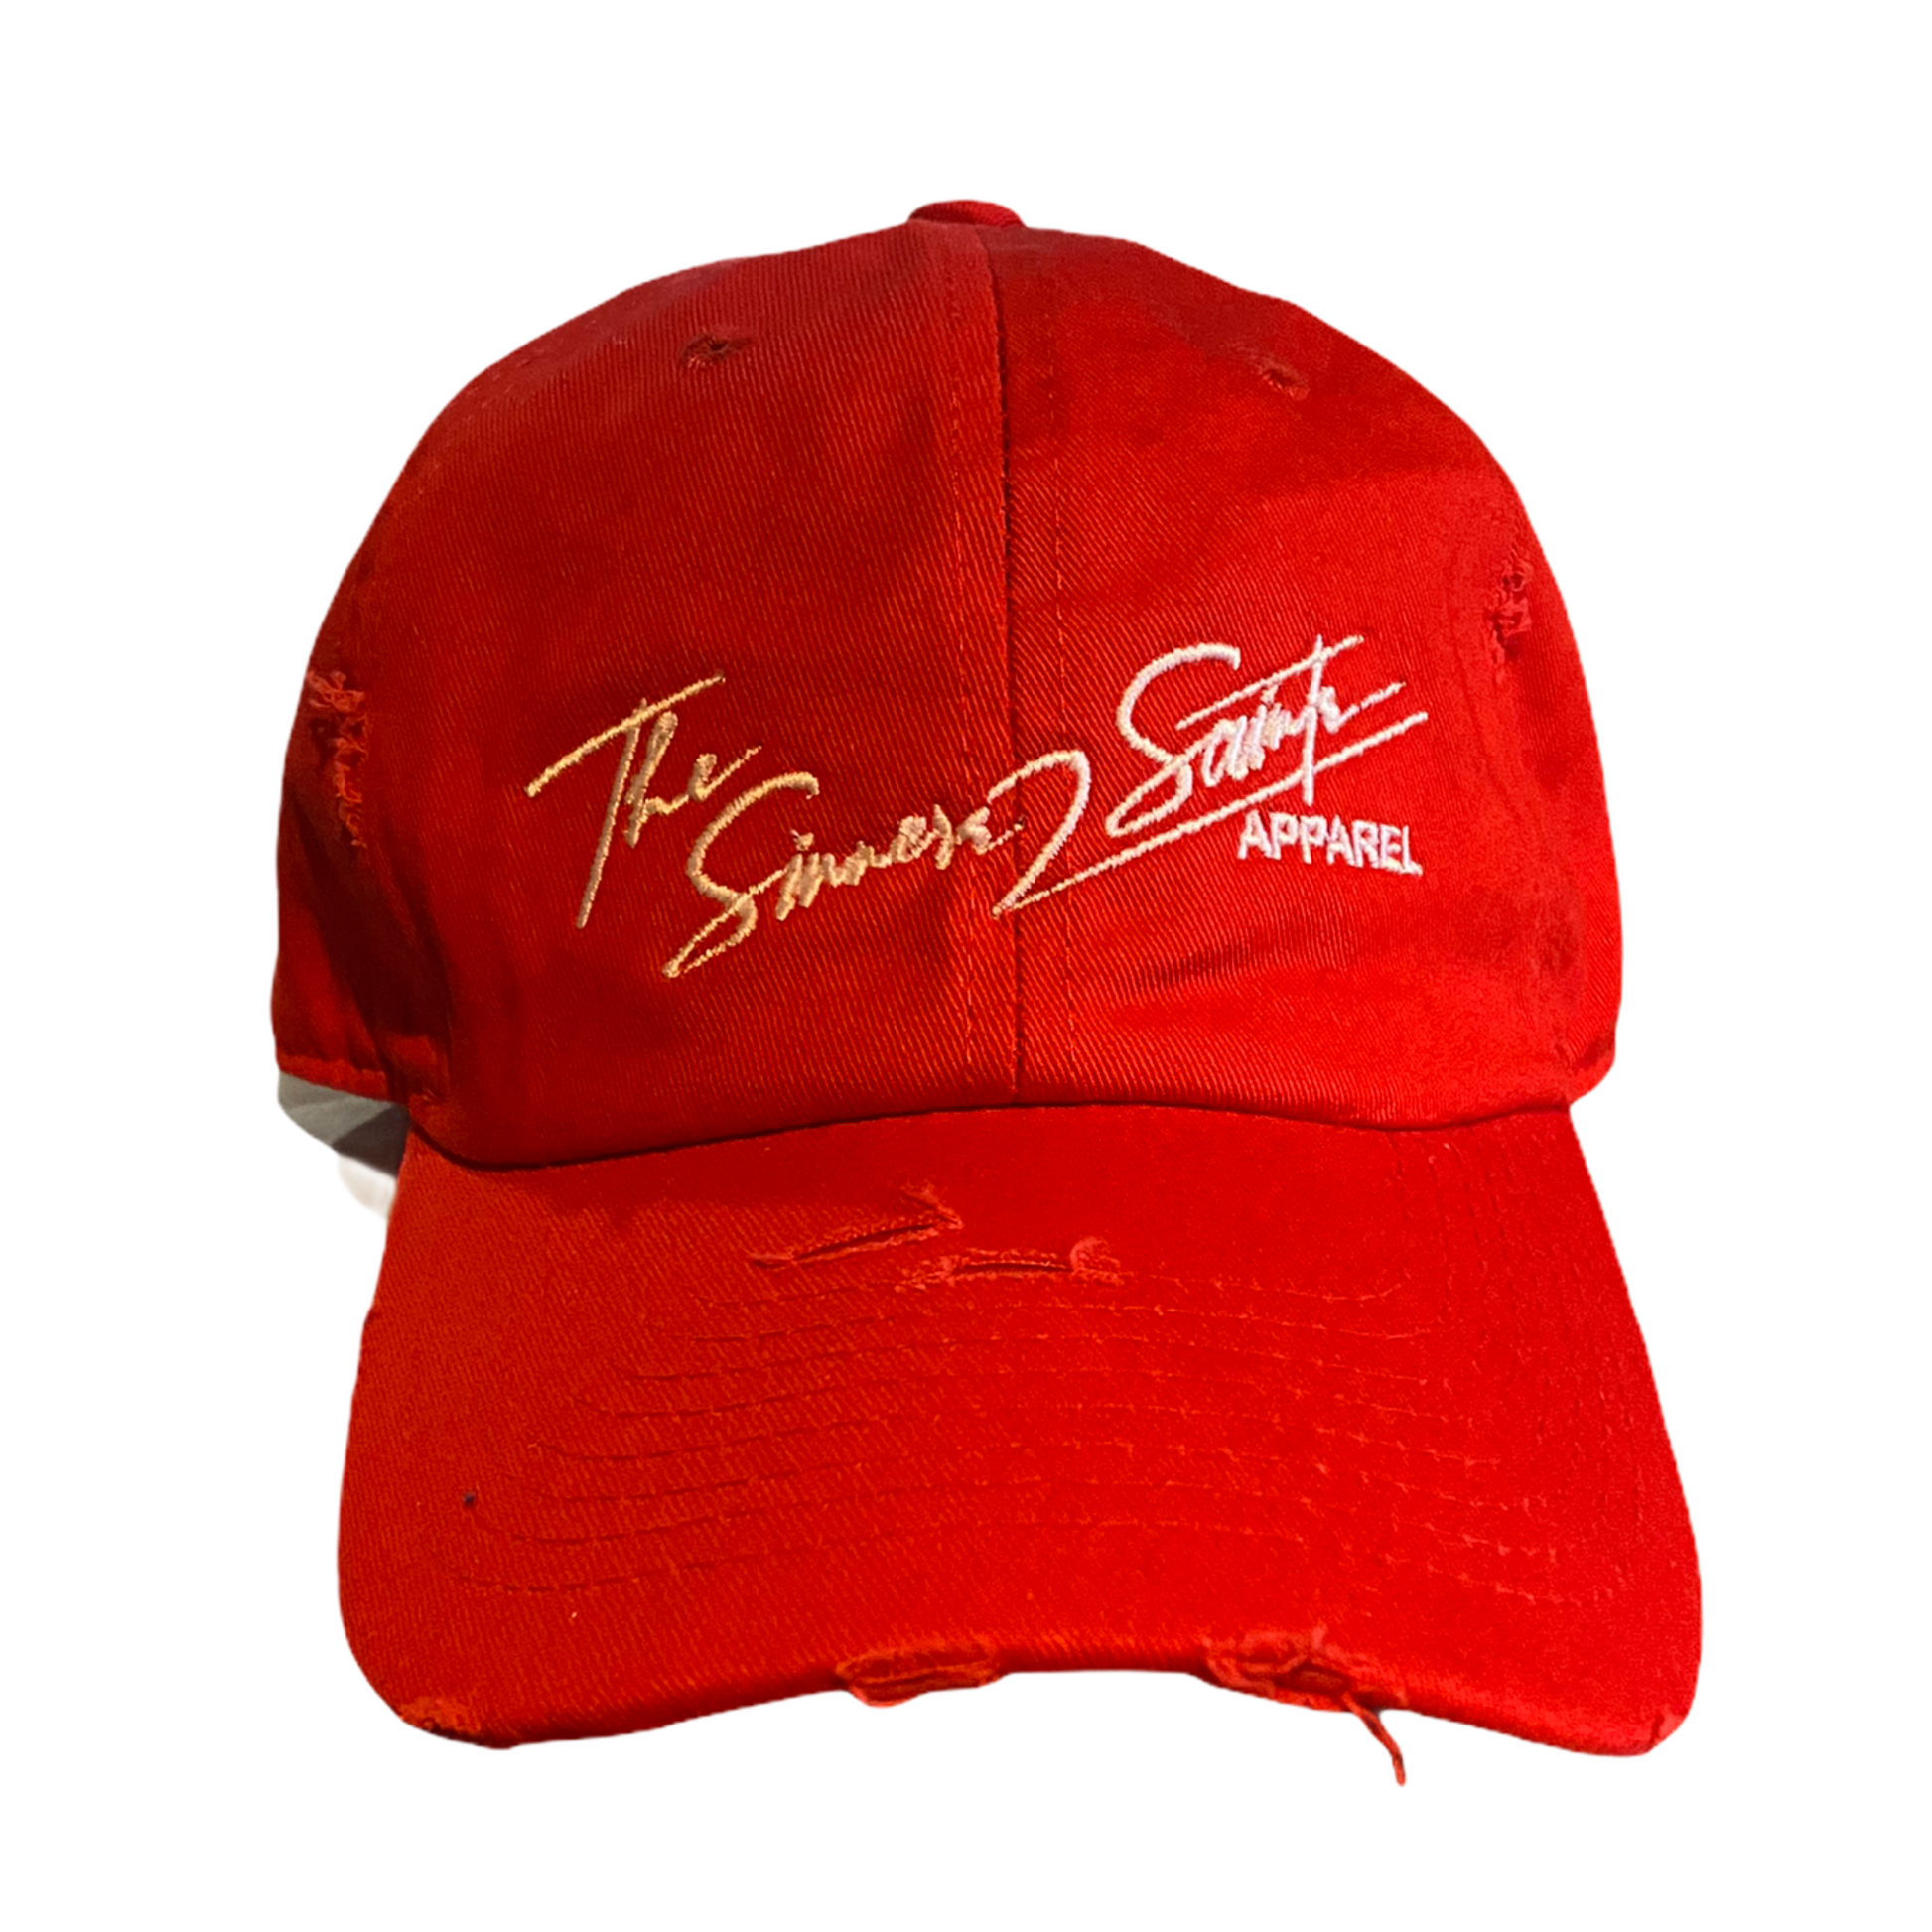 Embroidered S2S Signature Baseball Hats/Caps (Distressed) - TheSinners2Saints